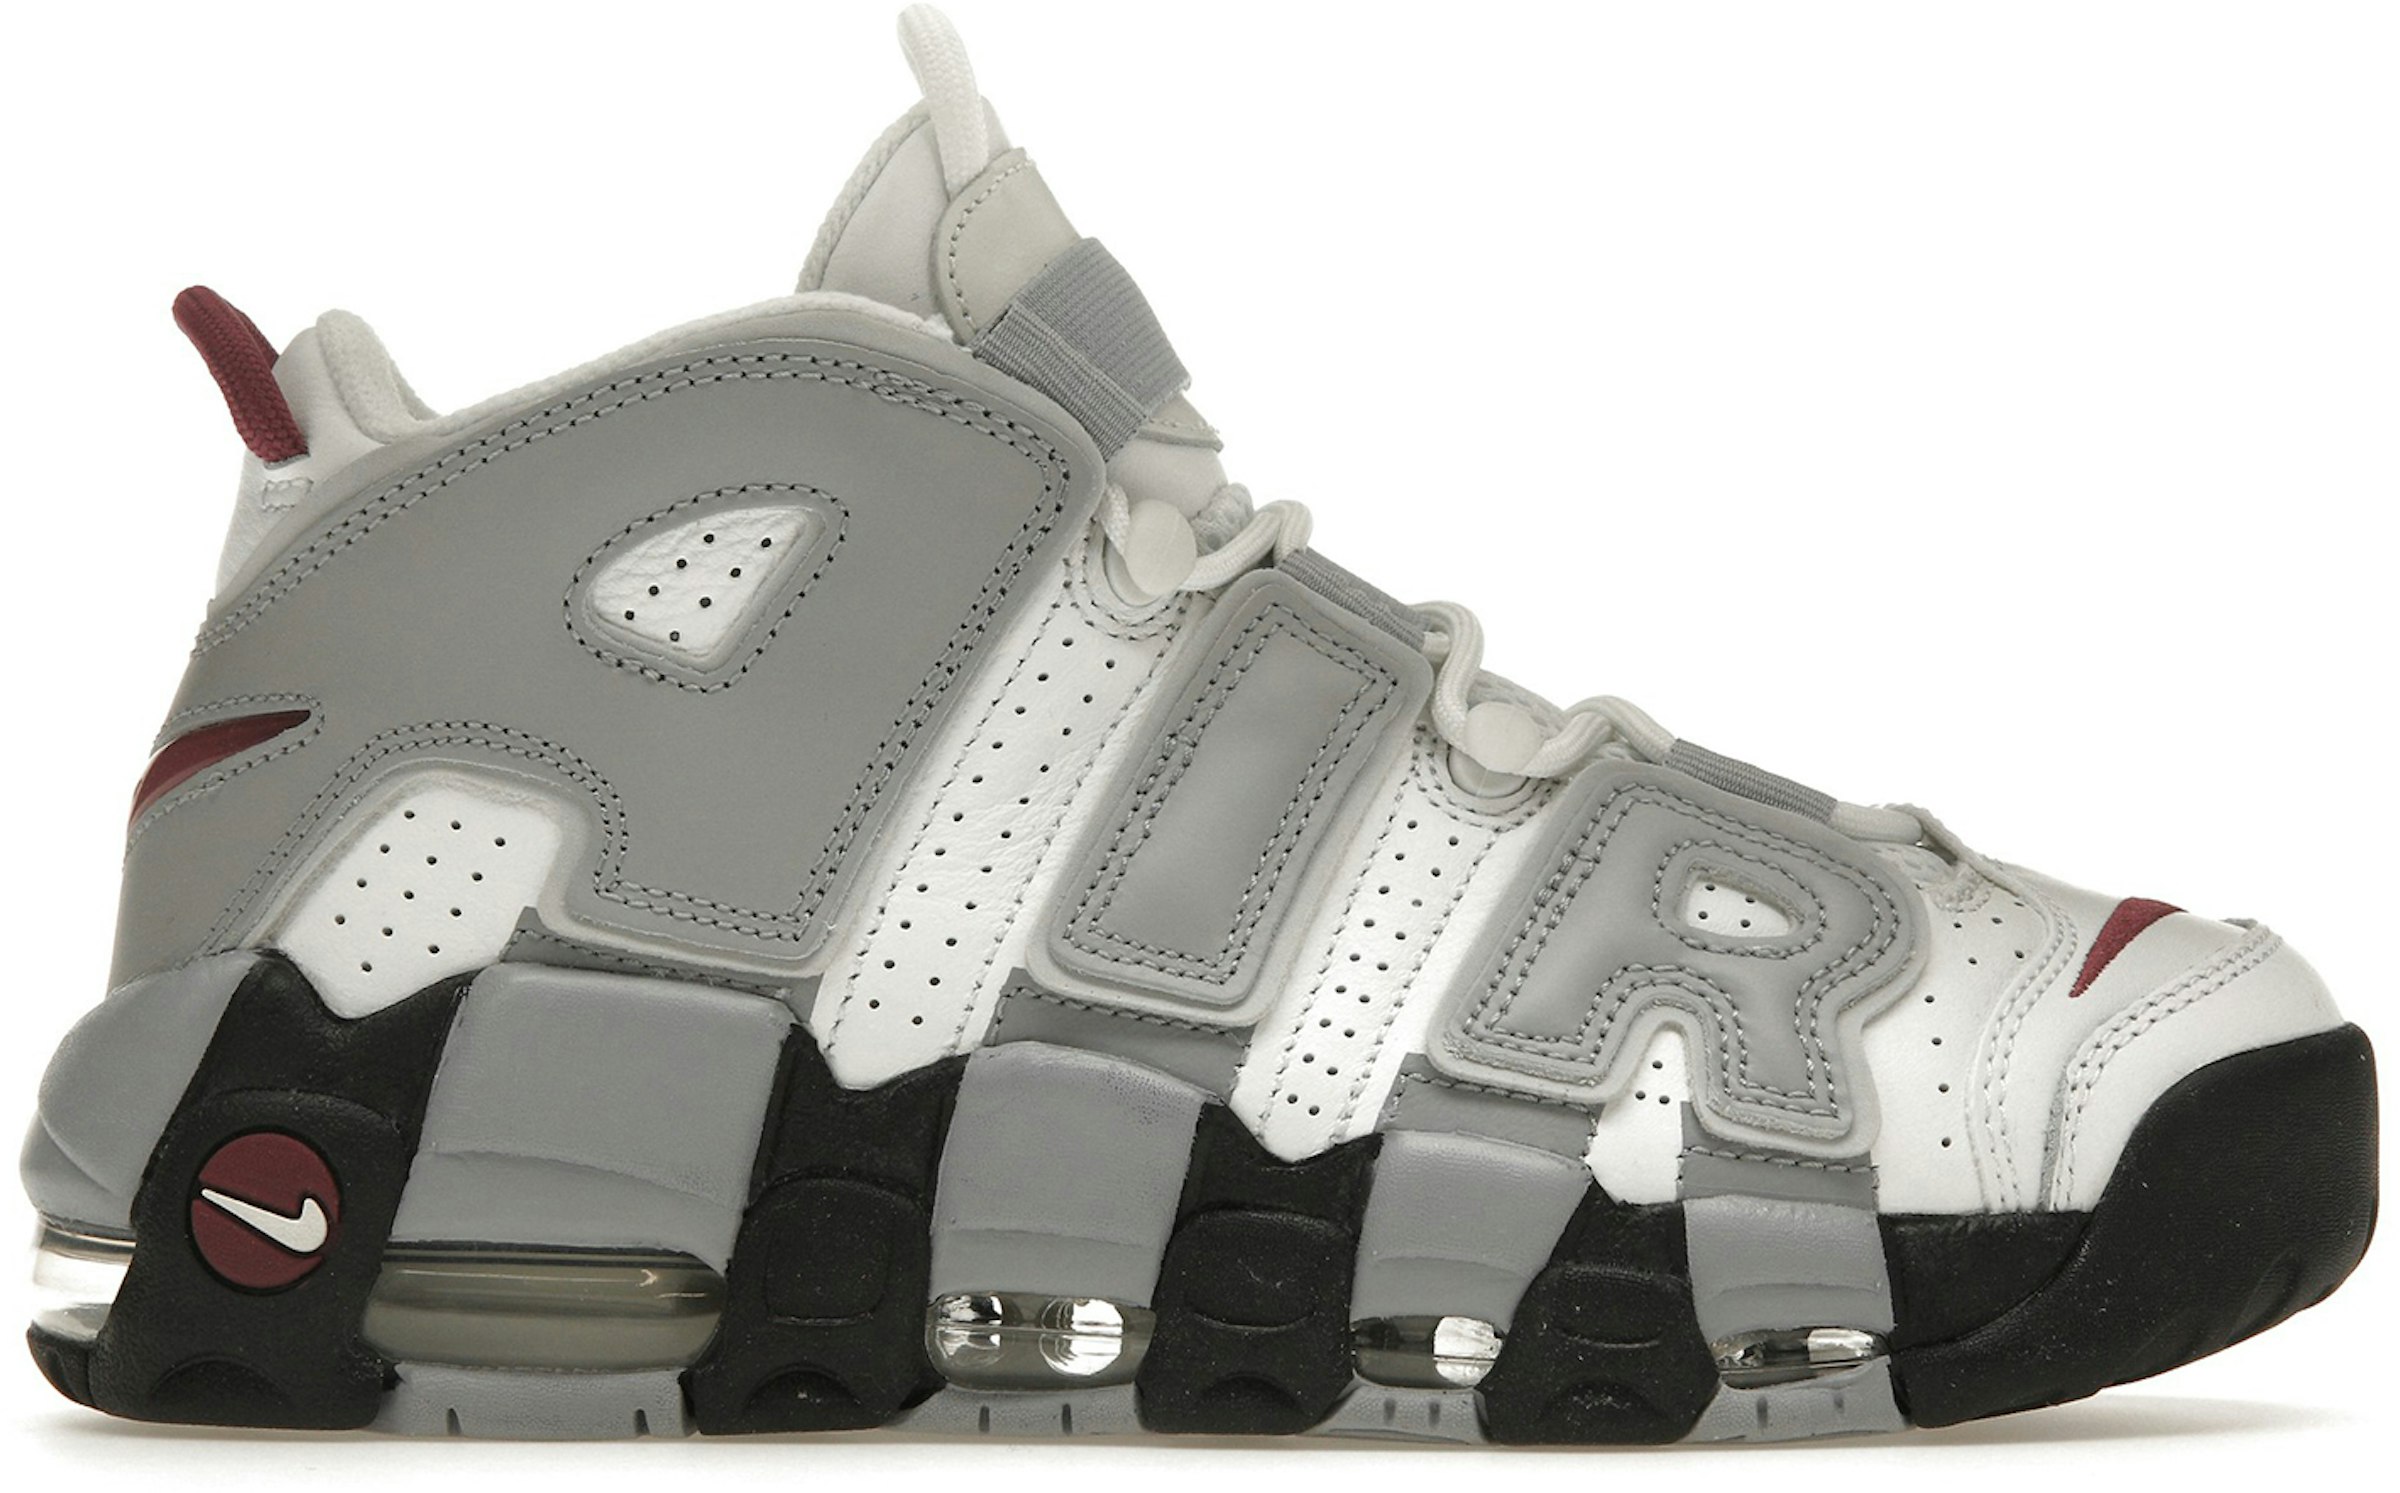 Nike Air Uptempo Rosewood Wolf Grey (Women's) - DV1137-100 - US